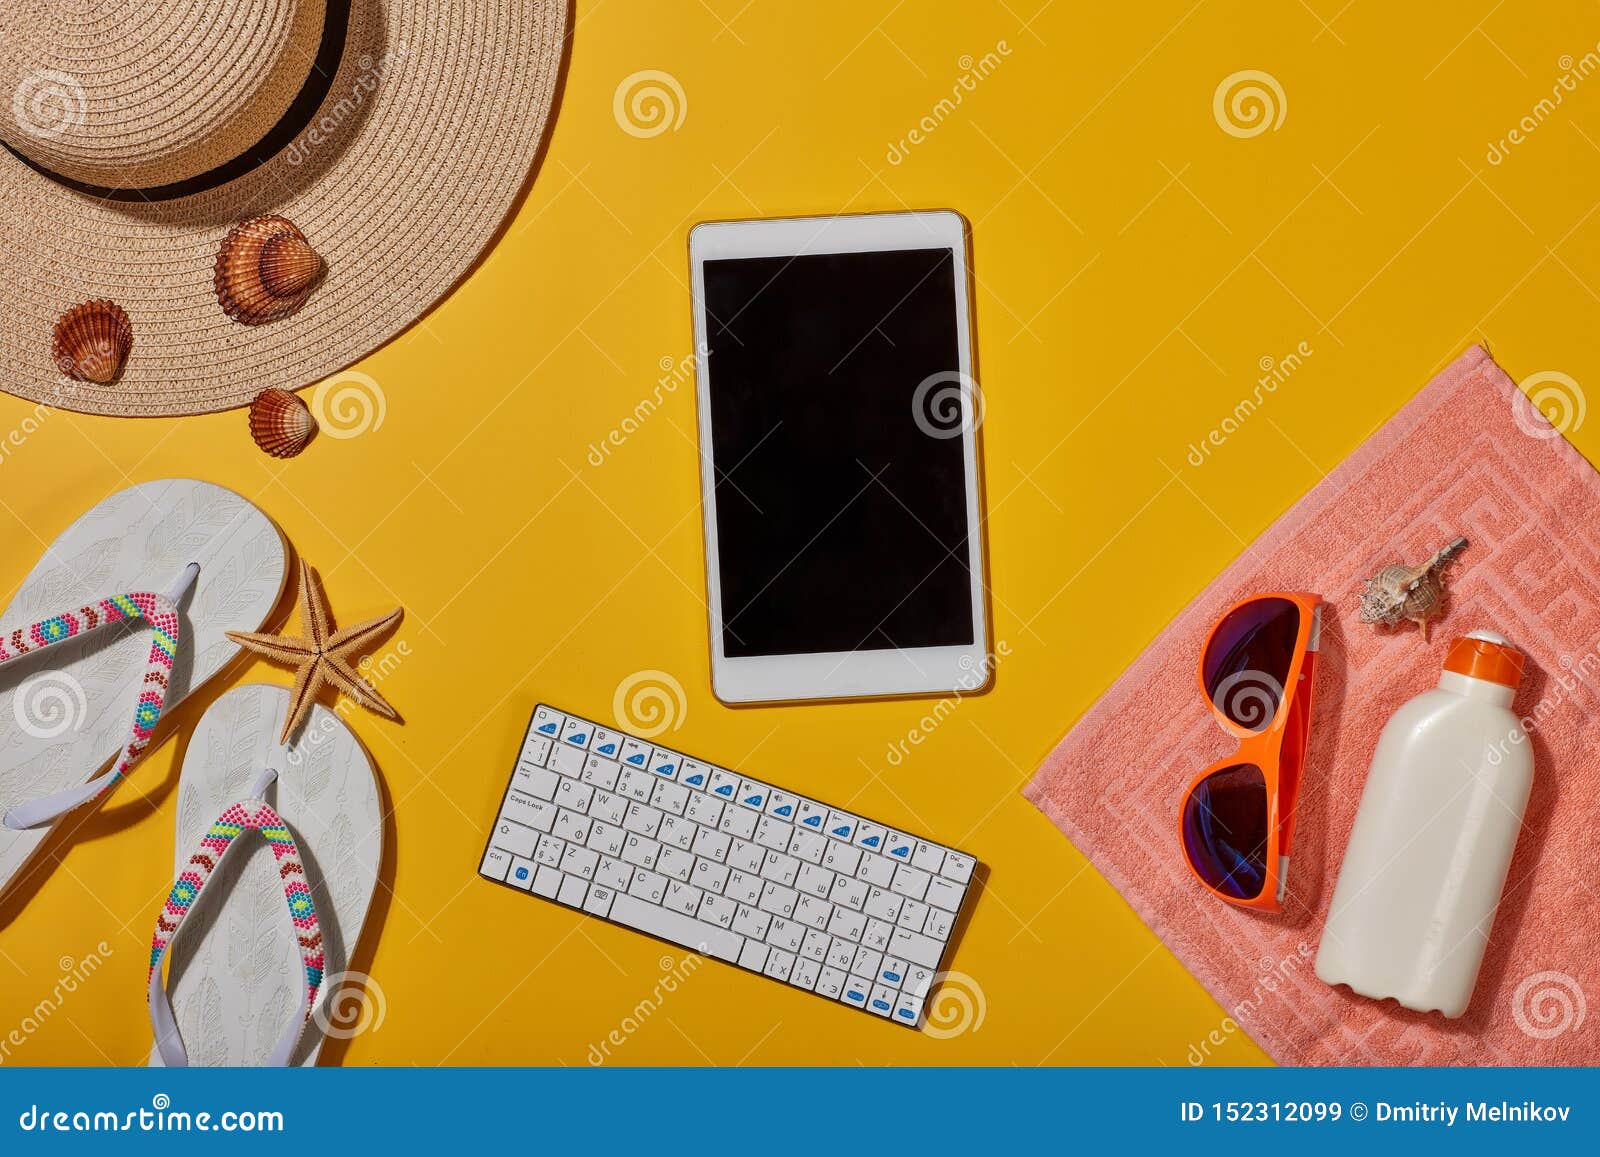 Beach Accessories, Sea Vacation Stock Image - Image of accessory, flop ...